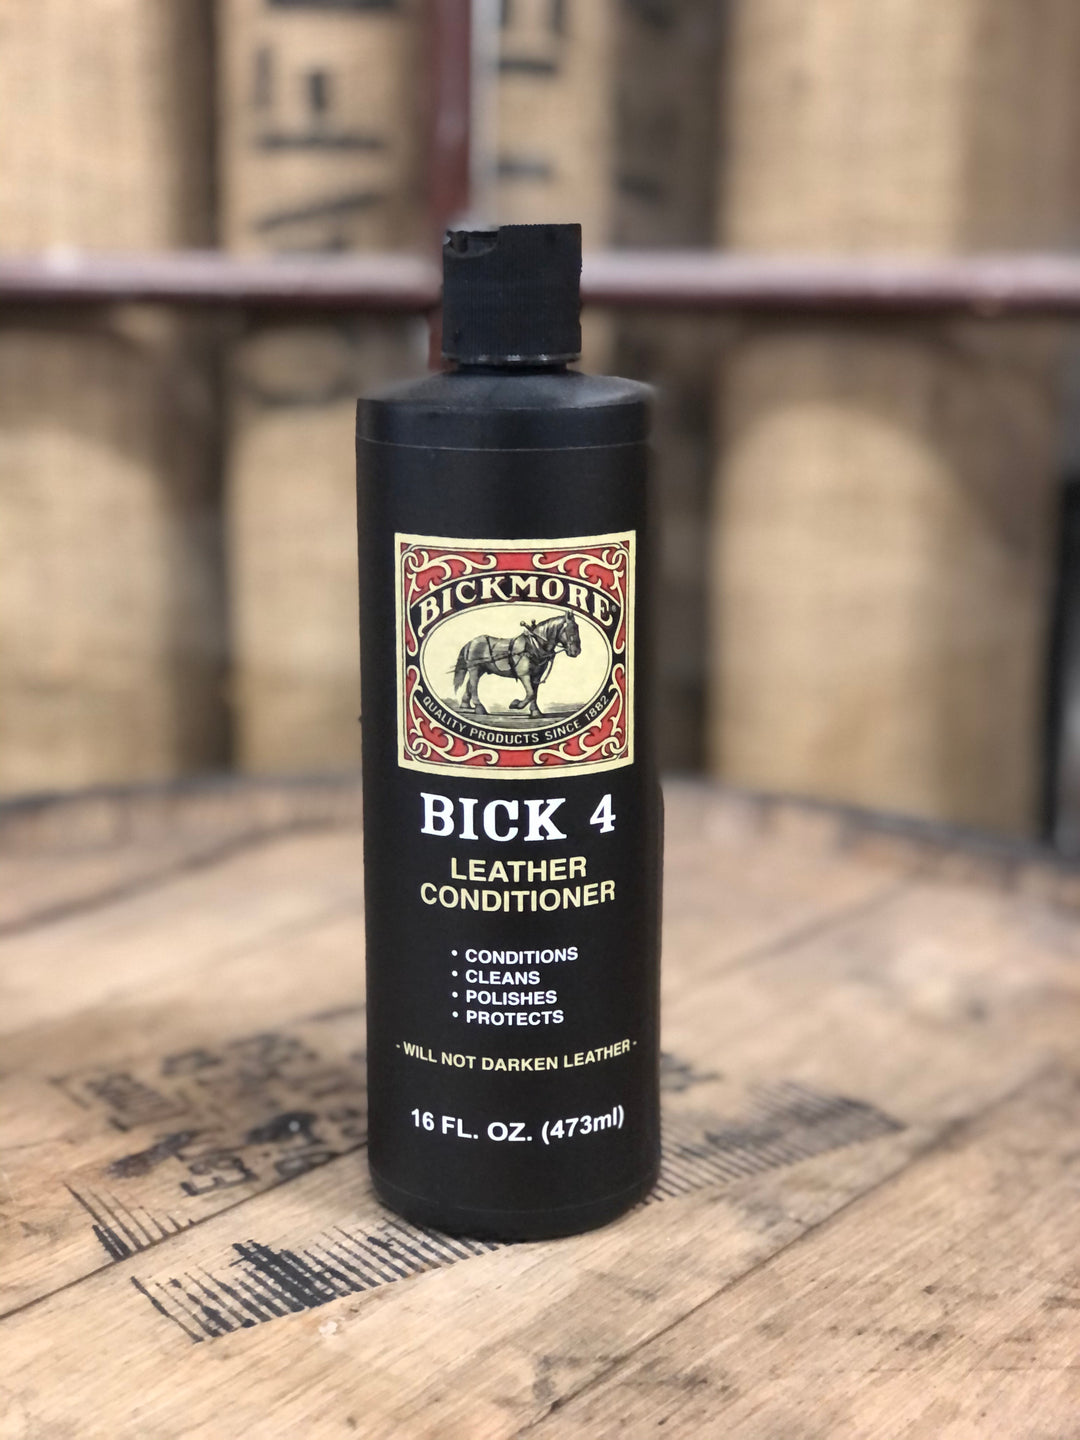 Bick 4 Leather Conditioner and Leather Cleaner 8 oz - Will Not Darken  Leather - Safe For All Colors of Leather Apparel, Furniture, Jackets,  Shoes